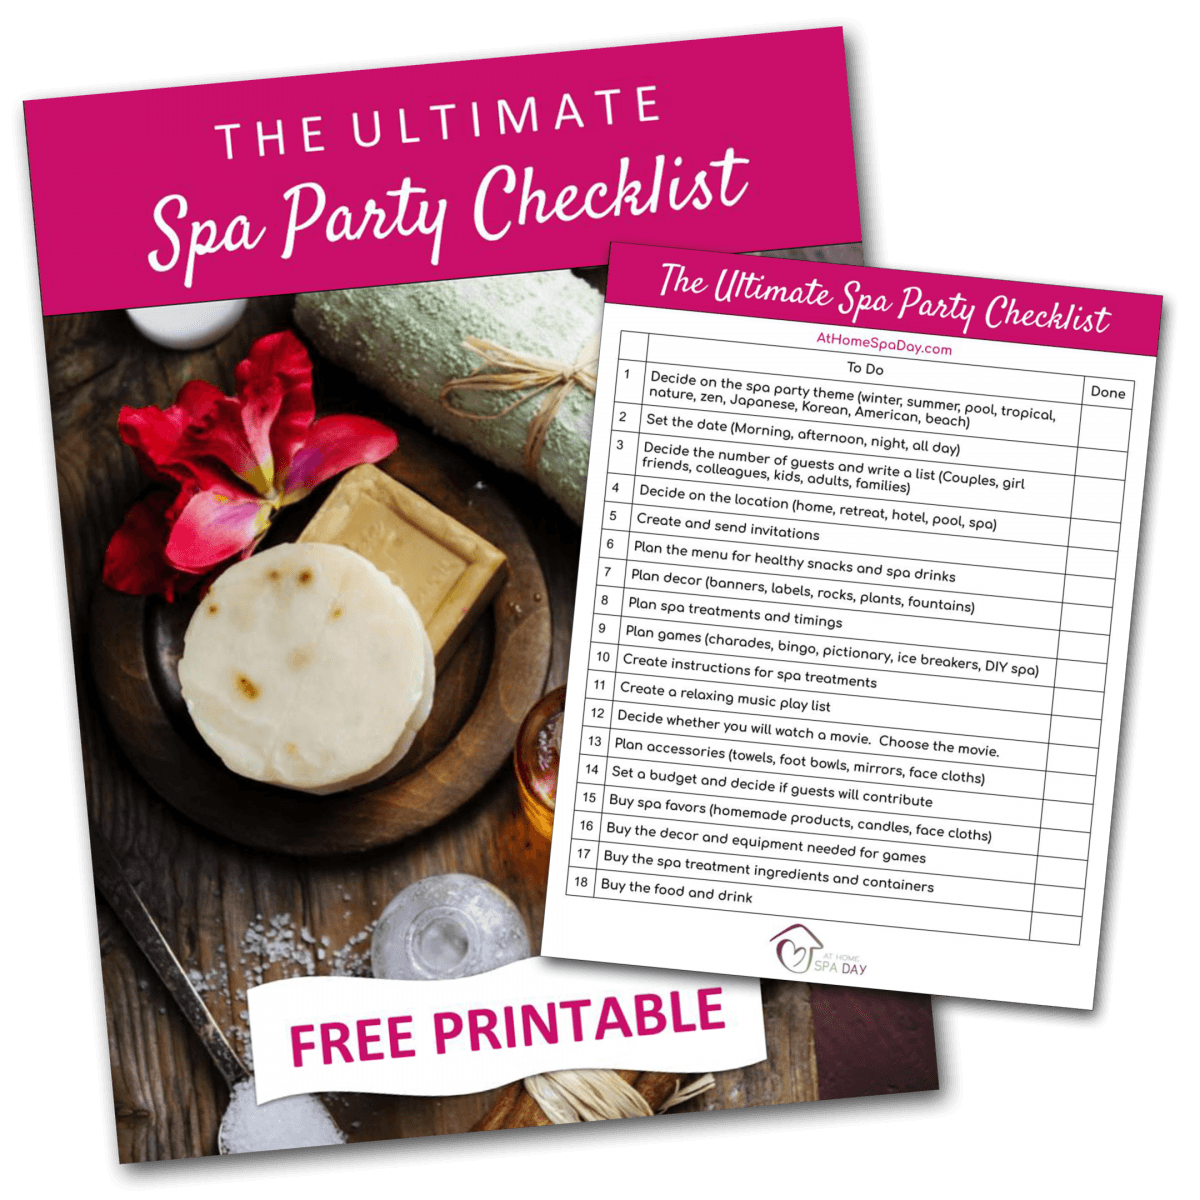 The Ultimate Spa Party Checklist (1)